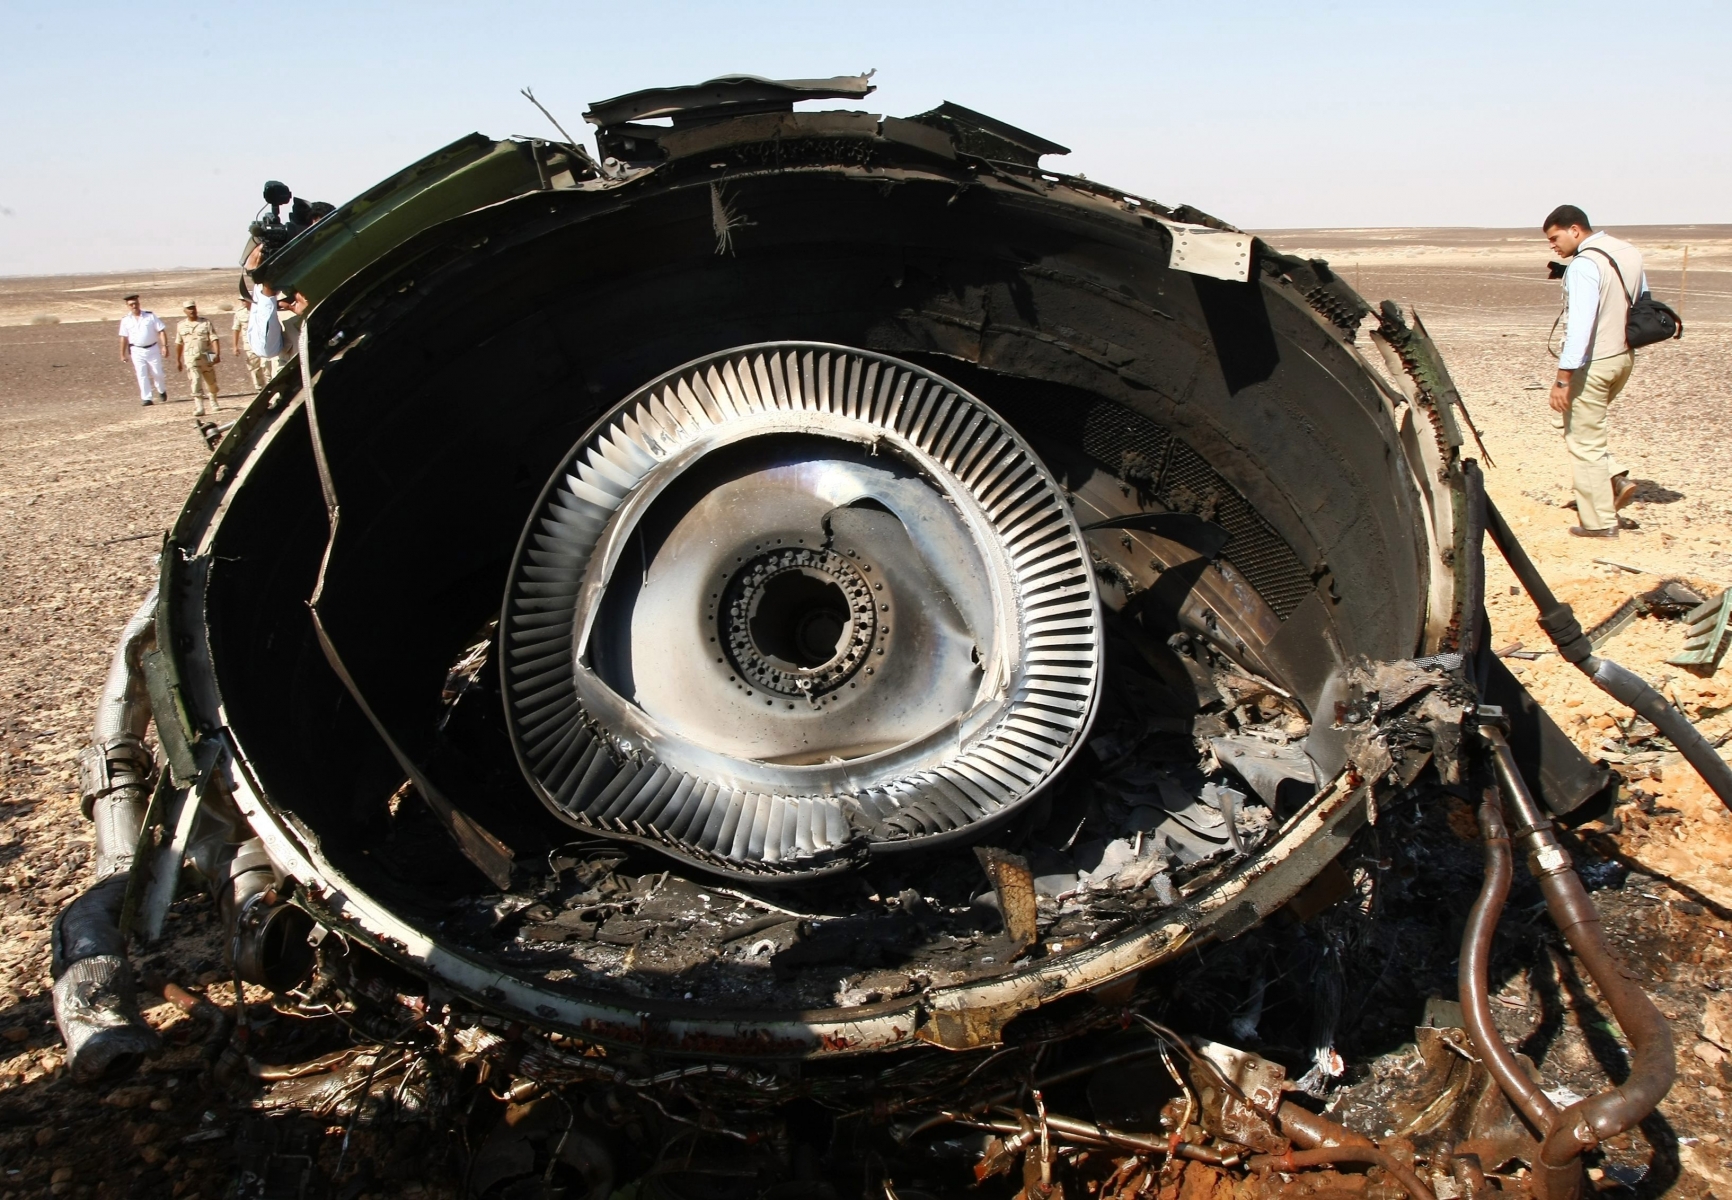 epa05007510 A handout picture provided by the Russian Emergency Ministry press service on 02 November 2015 shows a piece of an engine of Russian MetroJet Airbus A321 at the site of the crash  in Sinai, Egypt, 01 November 2015. The A321 plane of Metrojet en route from Sharm-el-Sheikh, to St. Petersburg crashed in the Sinai, Egypt on 31 October 2015, killing all 224 people on board.  EPA/MAXIM GRIGORIEV / RUSSIAN EMERGENCY MINISTRY / HANDOUT  HANDOUT EDITORIAL USE ONLY/NO SALES EGYPT RUSSIAN METROJET PLANE CRASH AFTERMATH